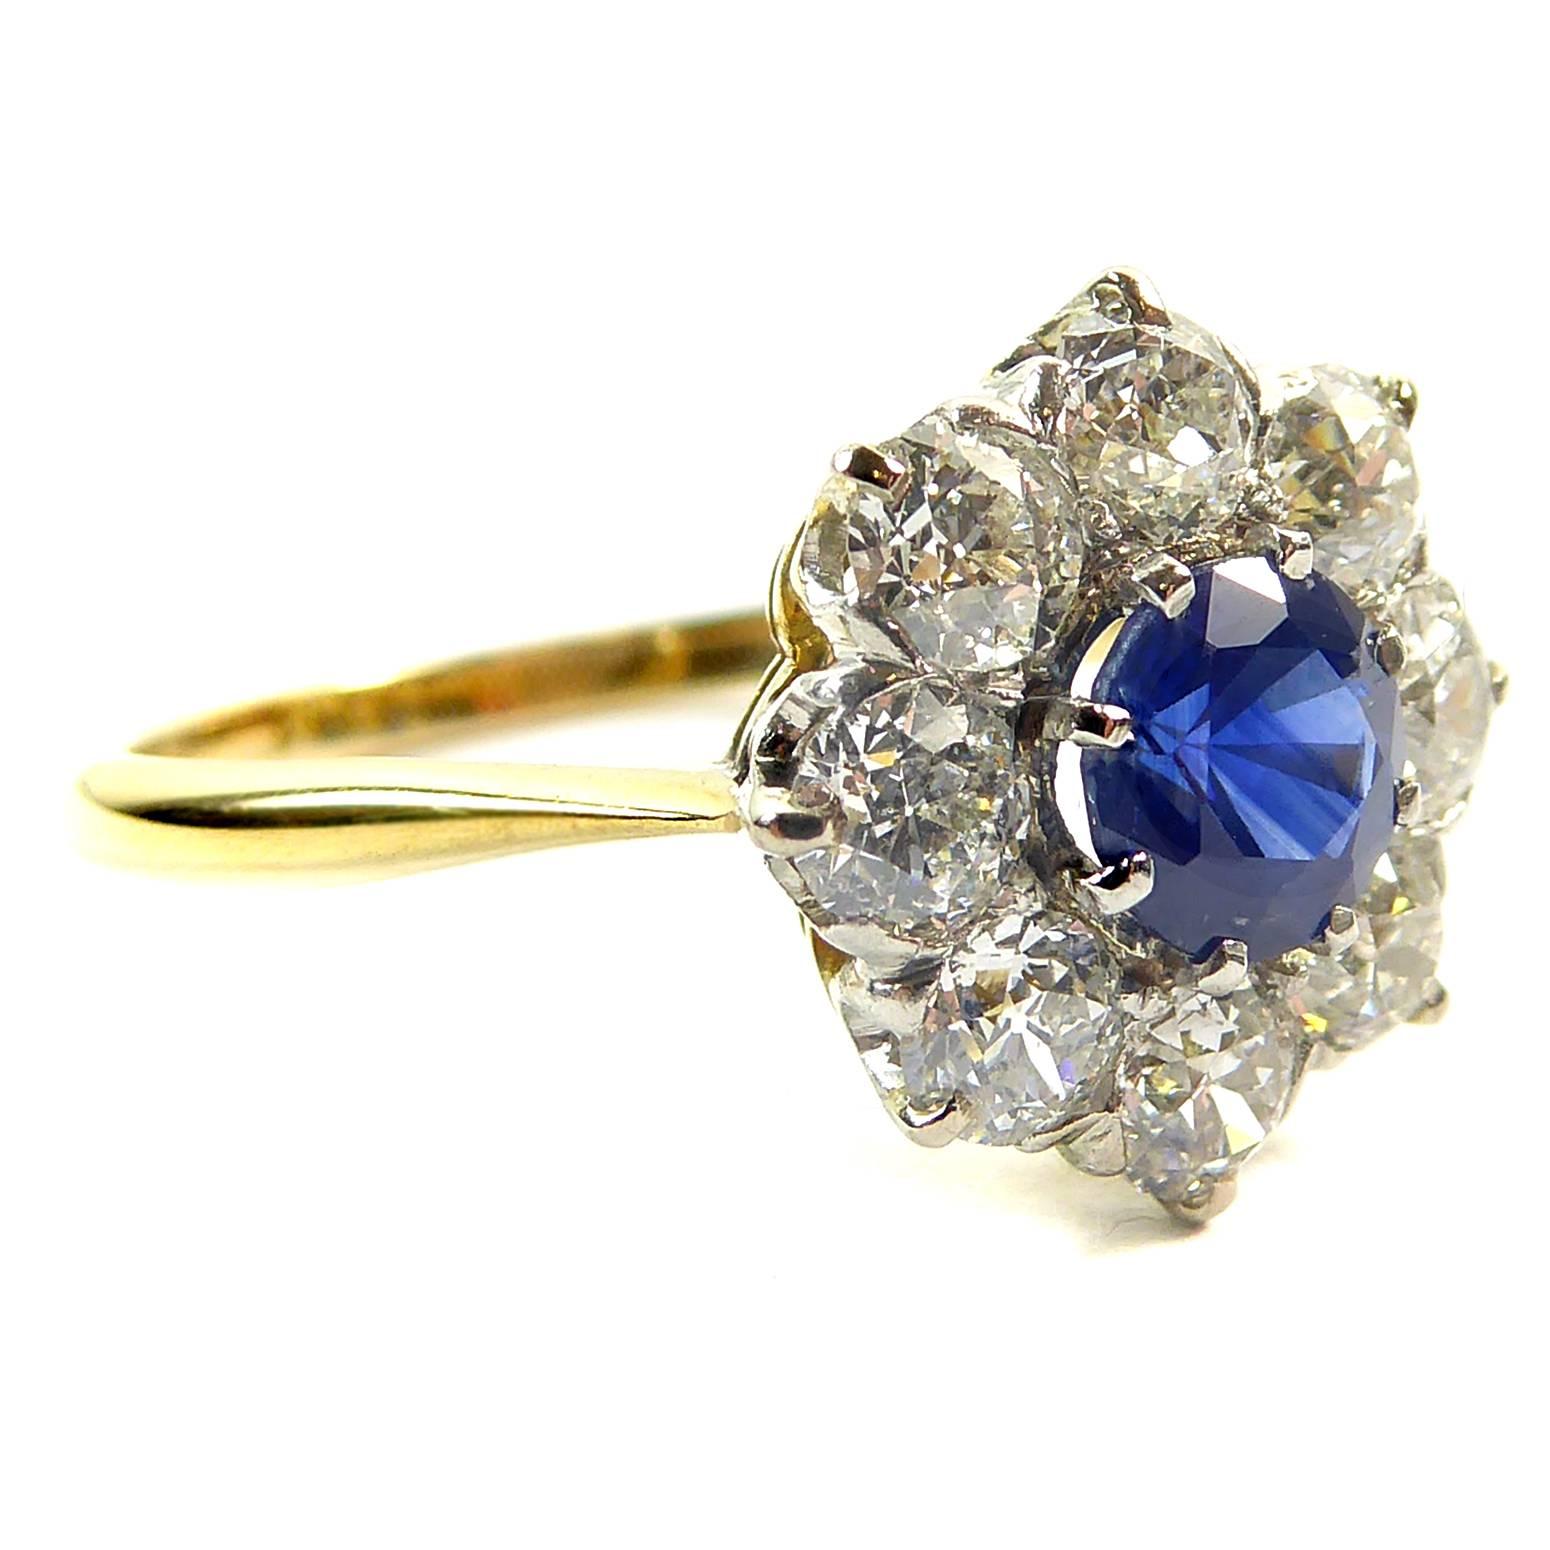 The ever-popular combination of sapphire and diamonds in a cluster design ring.  Always in demand as an engagement or dress ring, this example features a lovely royal blue sapphire in claw settings to a surround of diamonds.  The band is a